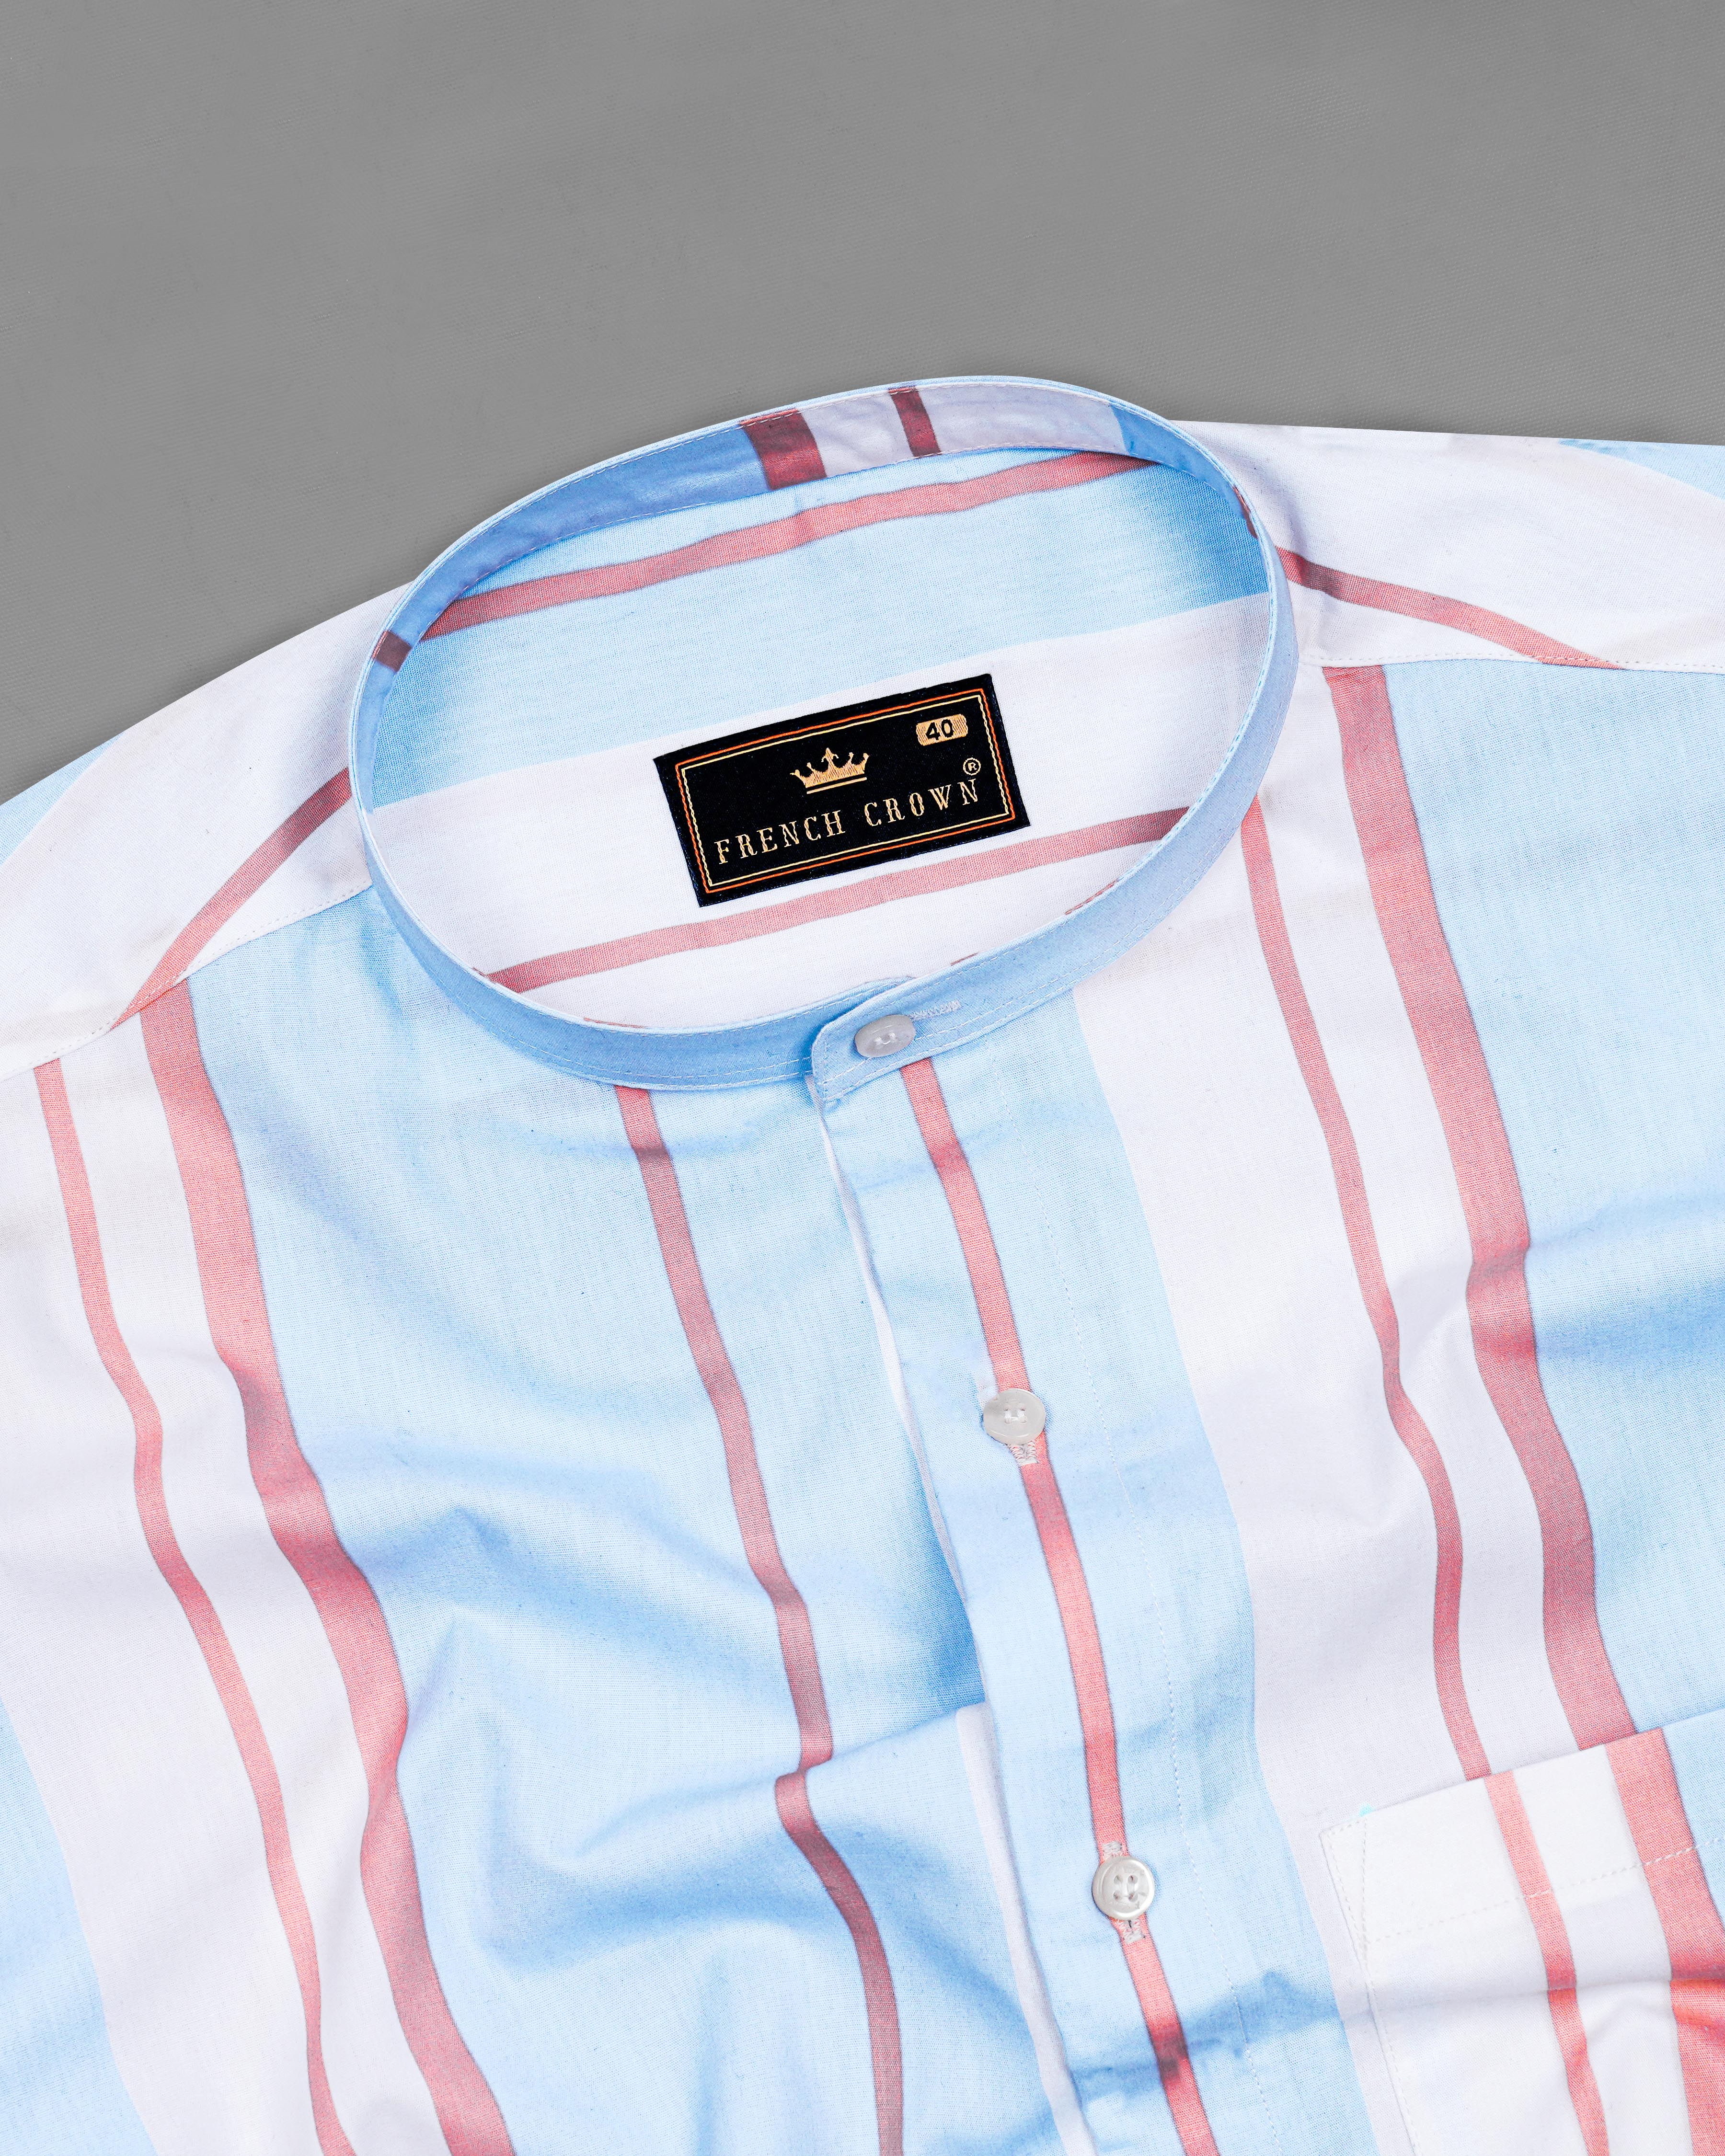 Bright White with Tropical Sky Blue and Daisy Pink Striped Premium Cotton Shirt 8453-M-38,8453-M-H-38,8453-M-39,8453-M-H-39,8453-M-40,8453-M-H-40,8453-M-42,8453-M-H-42,8453-M-44,8453-M-H-44,8453-M-46,8453-M-H-46,8453-M-48,8453-M-H-48,8453-M-50,8453-M-H-50,8453-M-52,8453-M-H-52